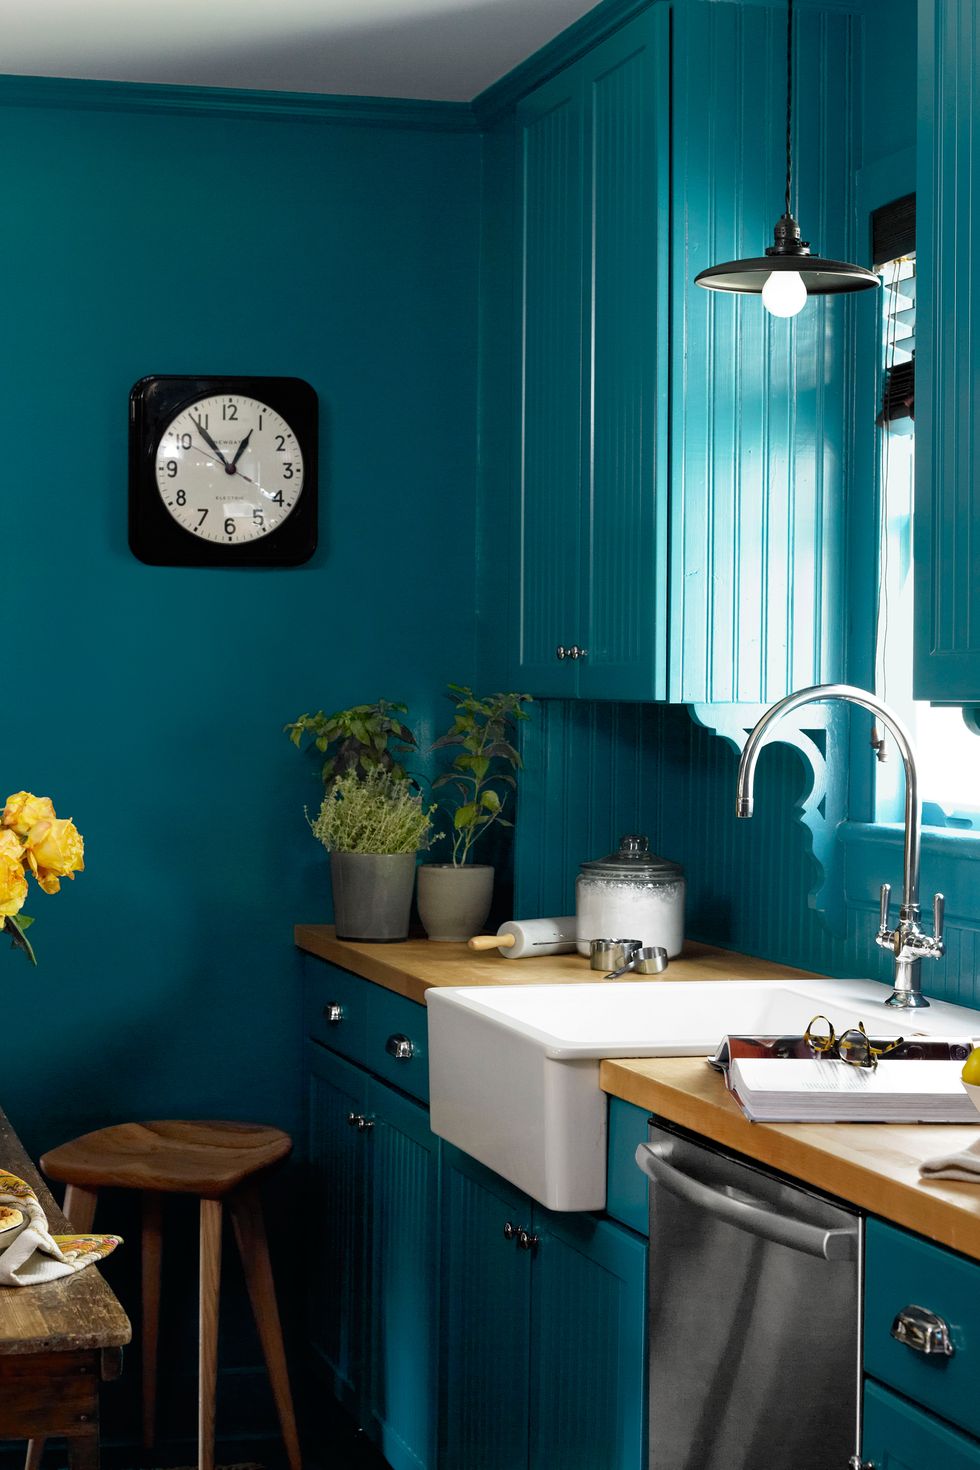 Blue, Room, Green, Turquoise, Kitchen, Countertop, Interior design, Furniture, Teal, Cabinetry, 